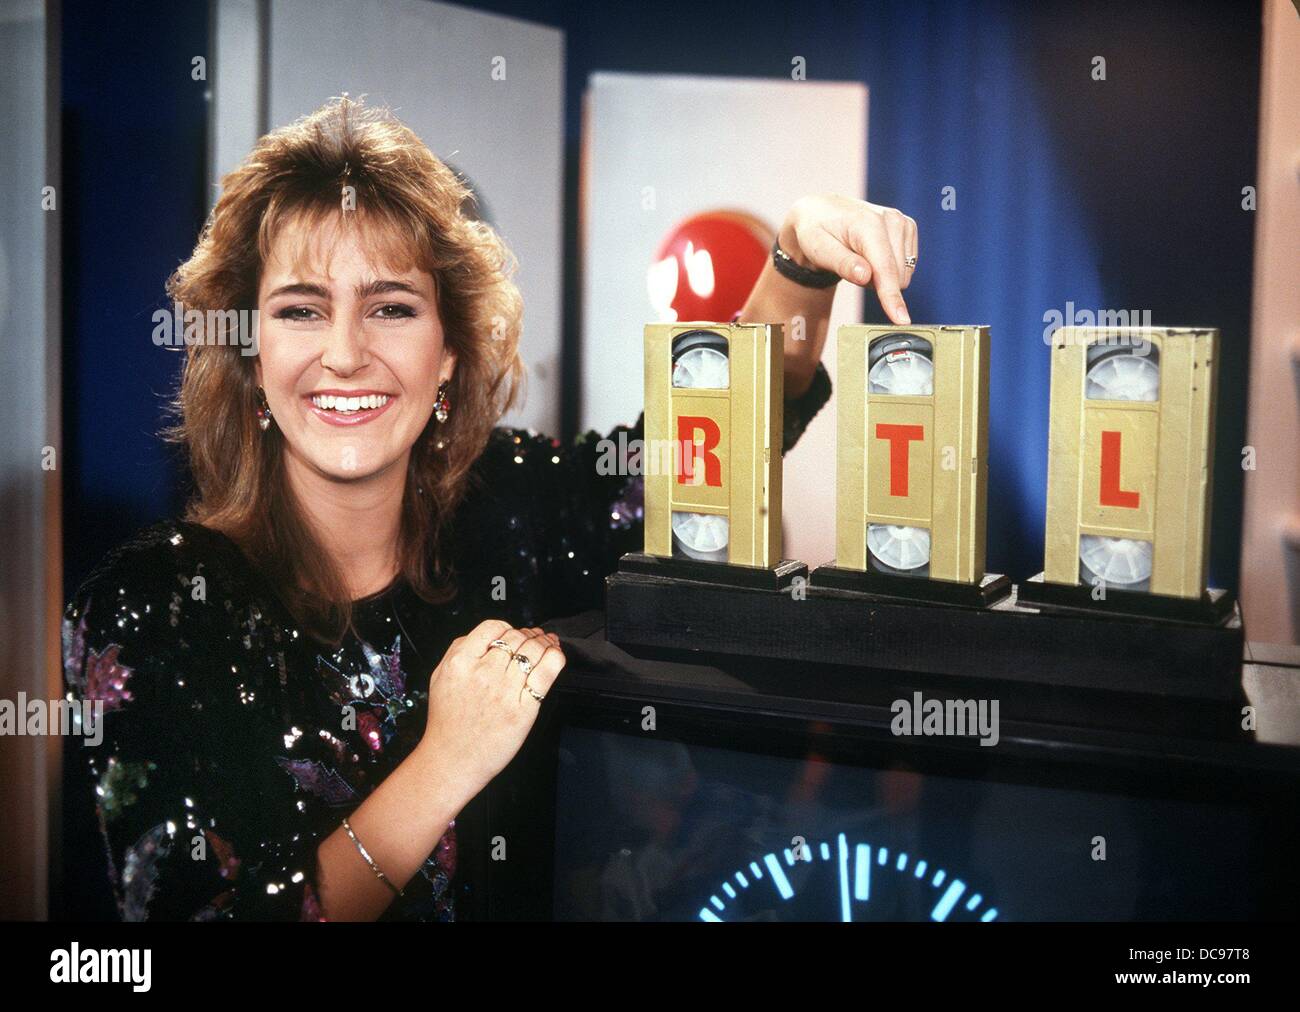 RTL plus presenter Nicole Bierhoff opens the programme of the private television station RTL plus on the 1st of January in 1988. Stock Photo